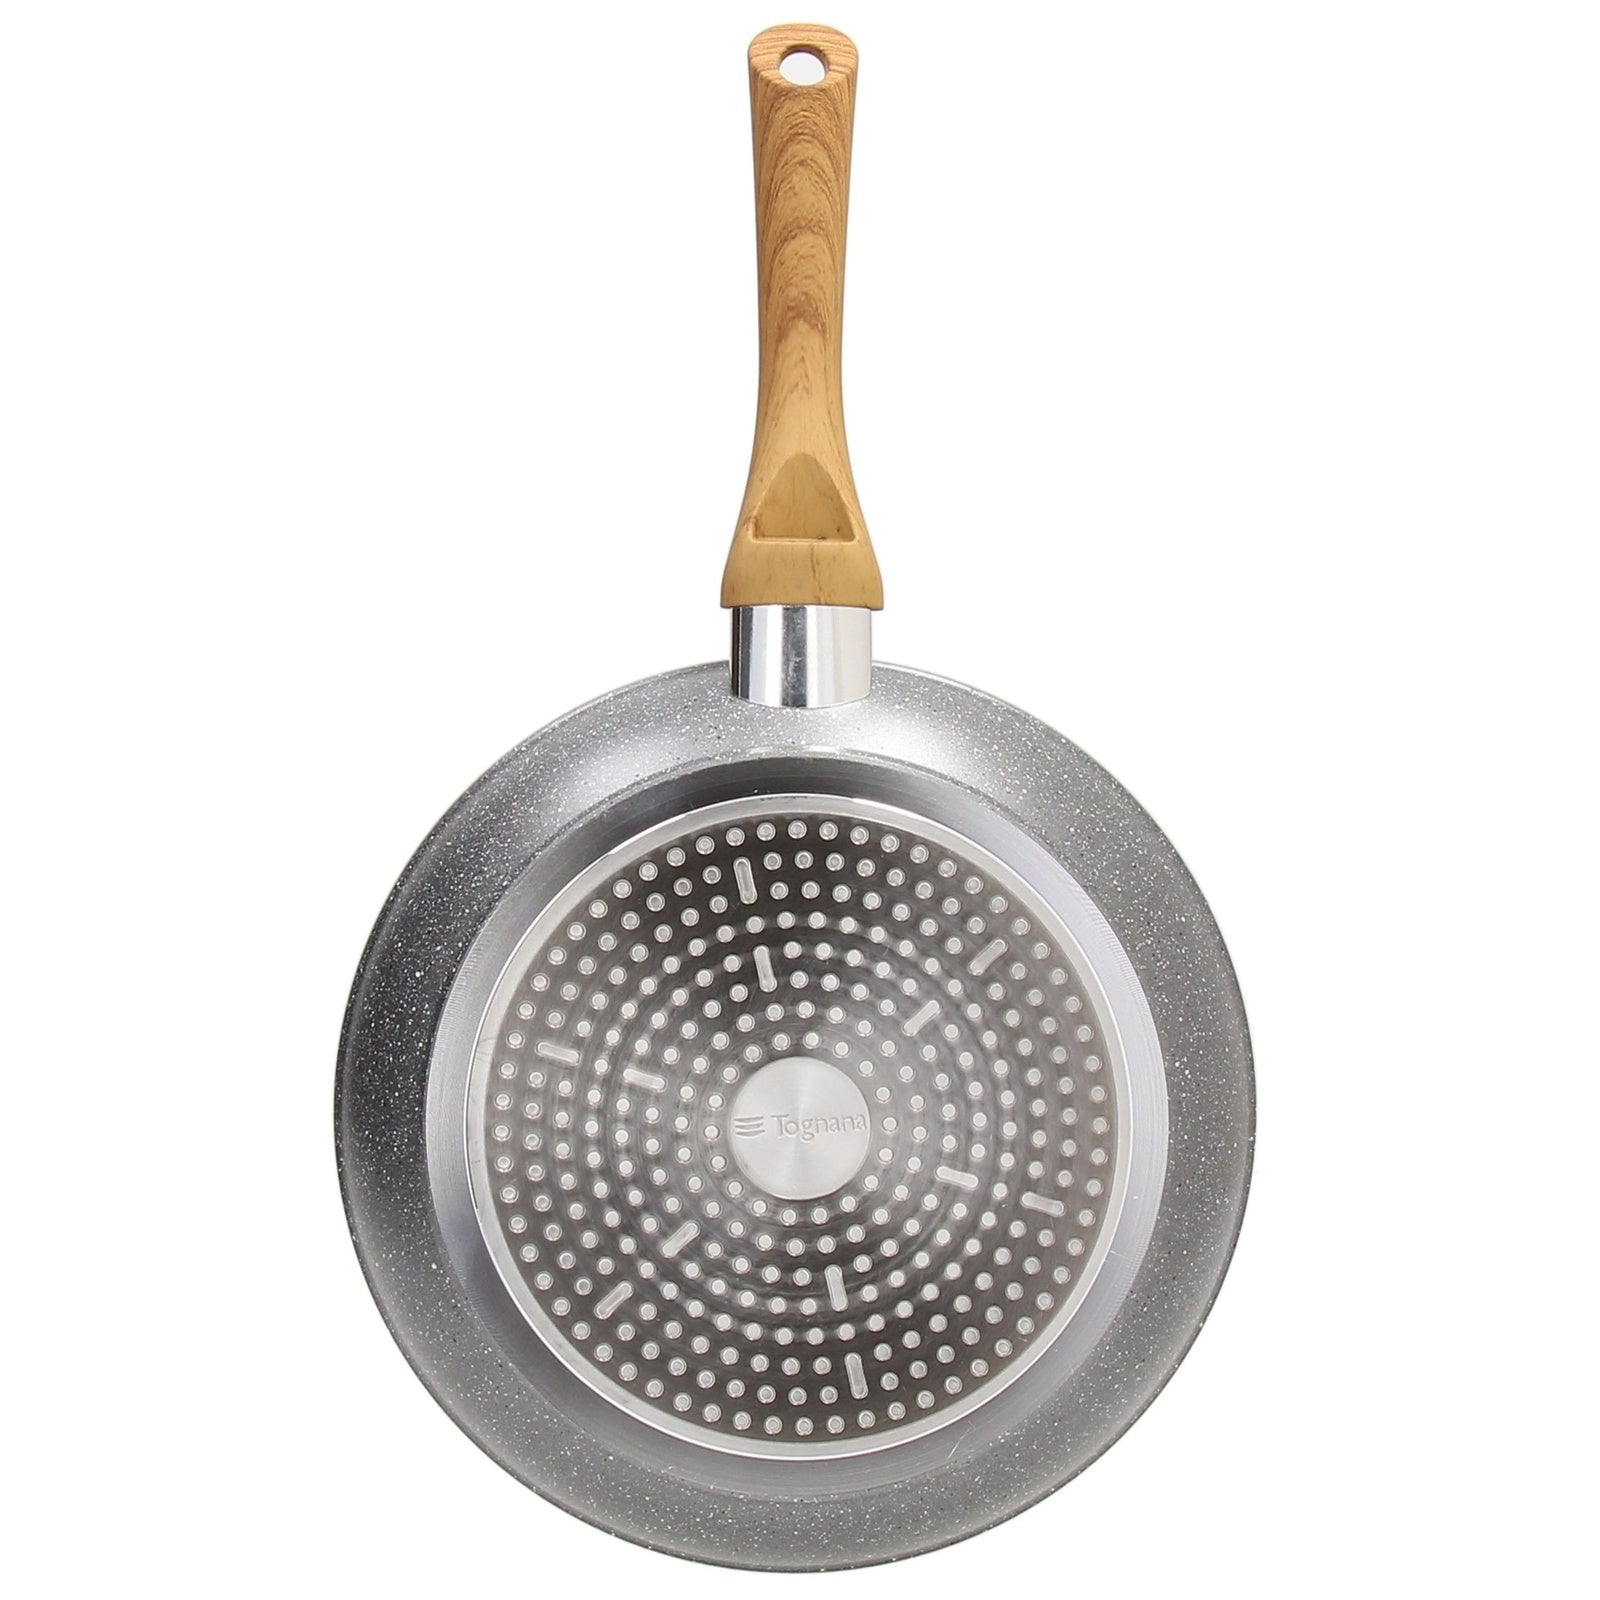 Wood & Stone Style Aluminum Nonstick 9.4" Fry Pan - Kitchen Tools and Utensils